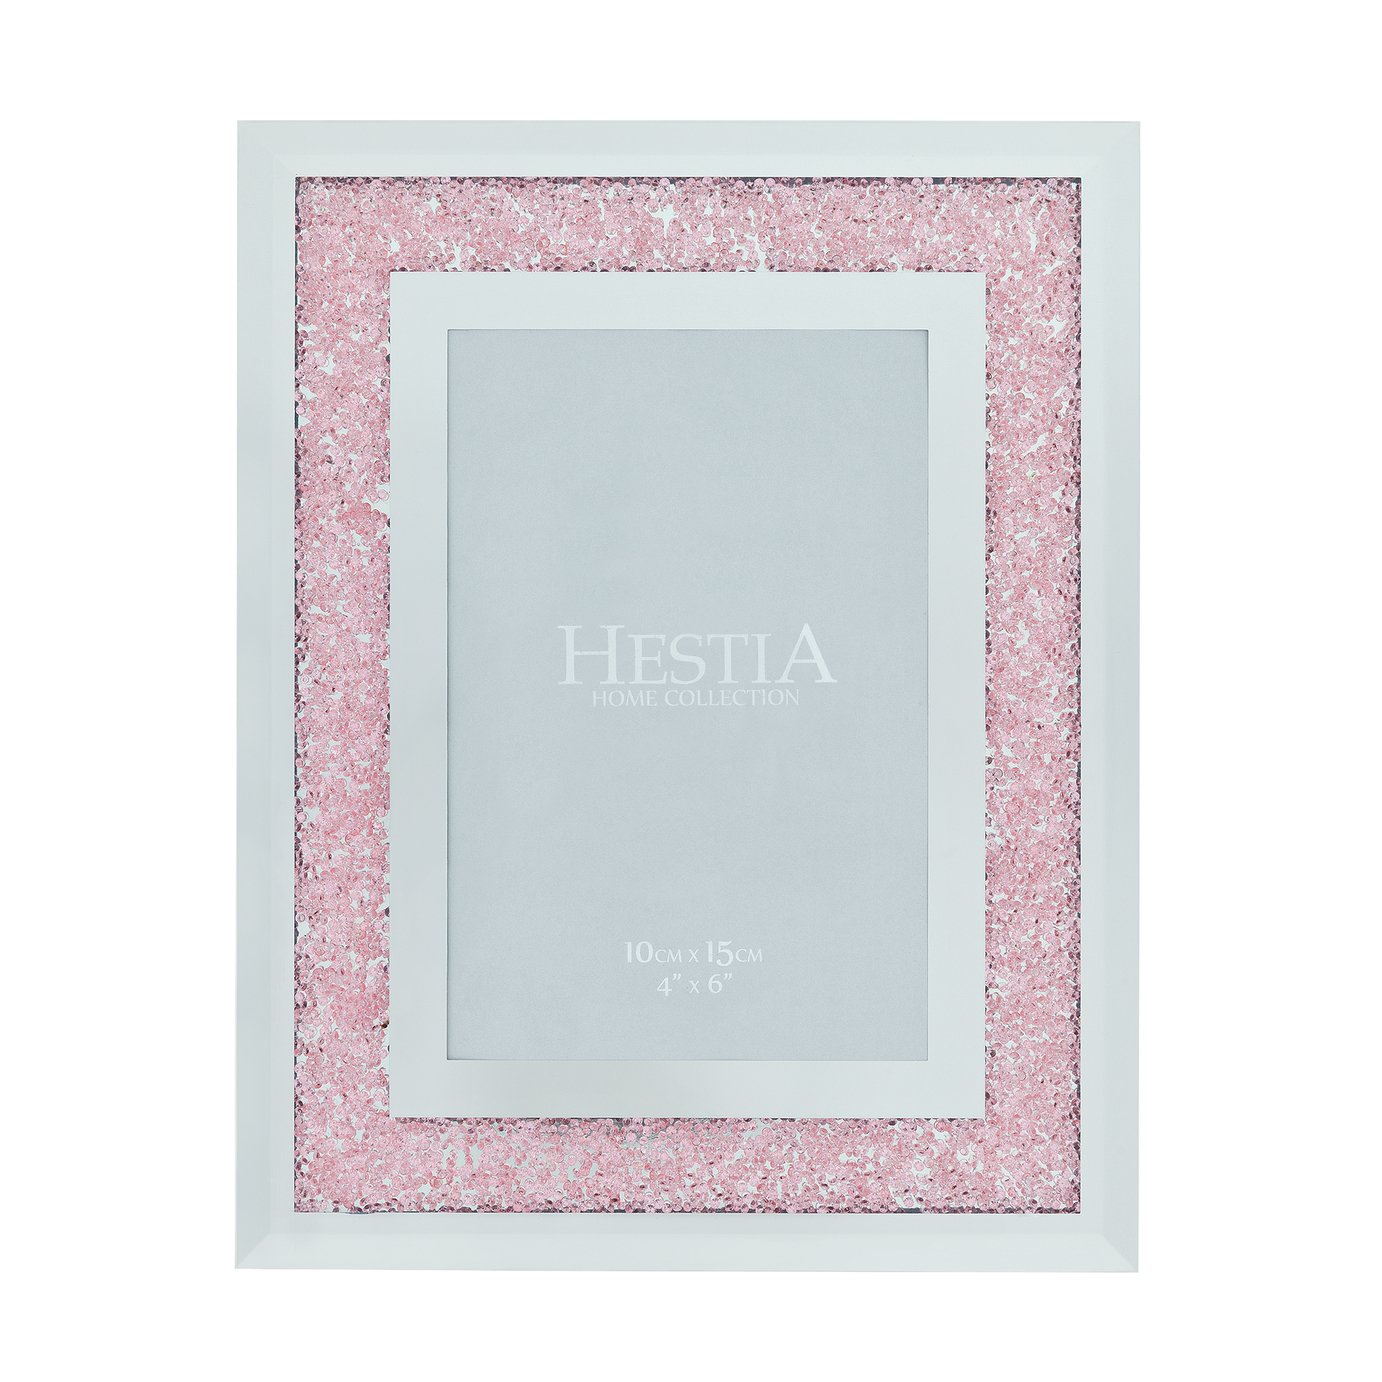 Argos Home Hestia Crystal 5x7in Photo Frame - Pink